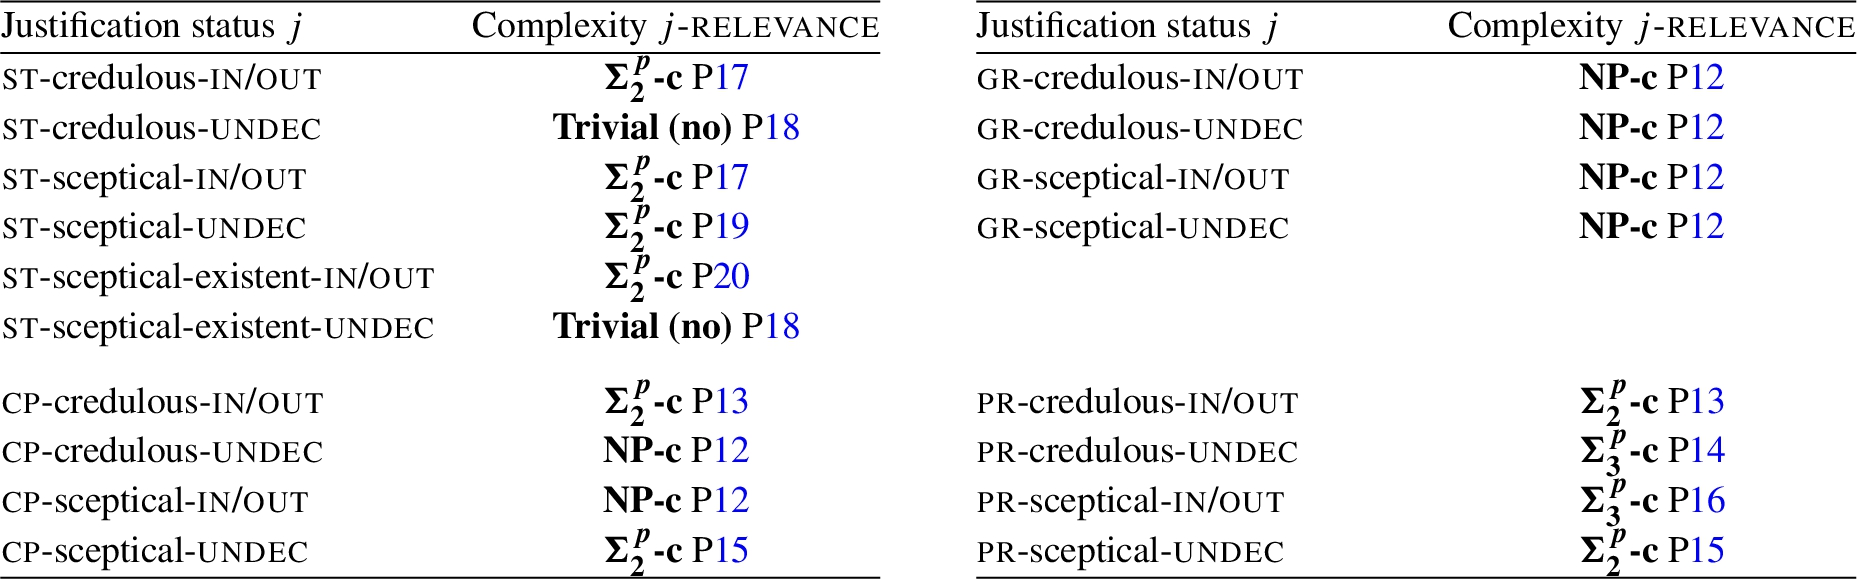 Overview of all complexity results related to relevance. We refer to the corresponding proposition by “P” and the proposition number. Full proofs for each of the propositions are presented in the appendix